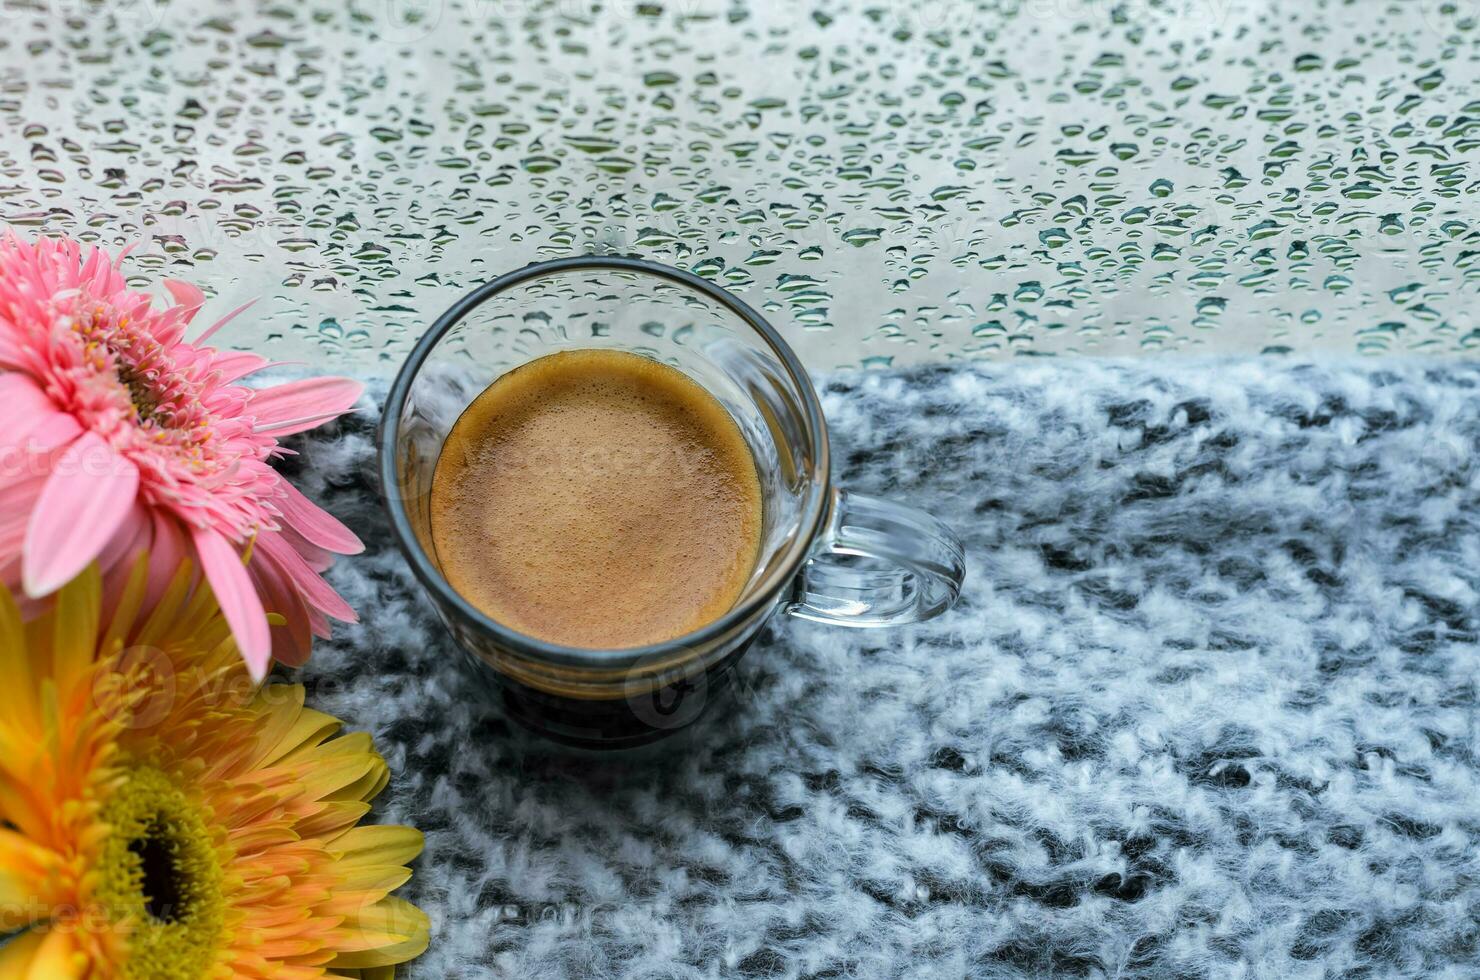 A glass of Espresso coffee shot puts on bed with Gerbera flowers when rain drop on window in raining day. photo